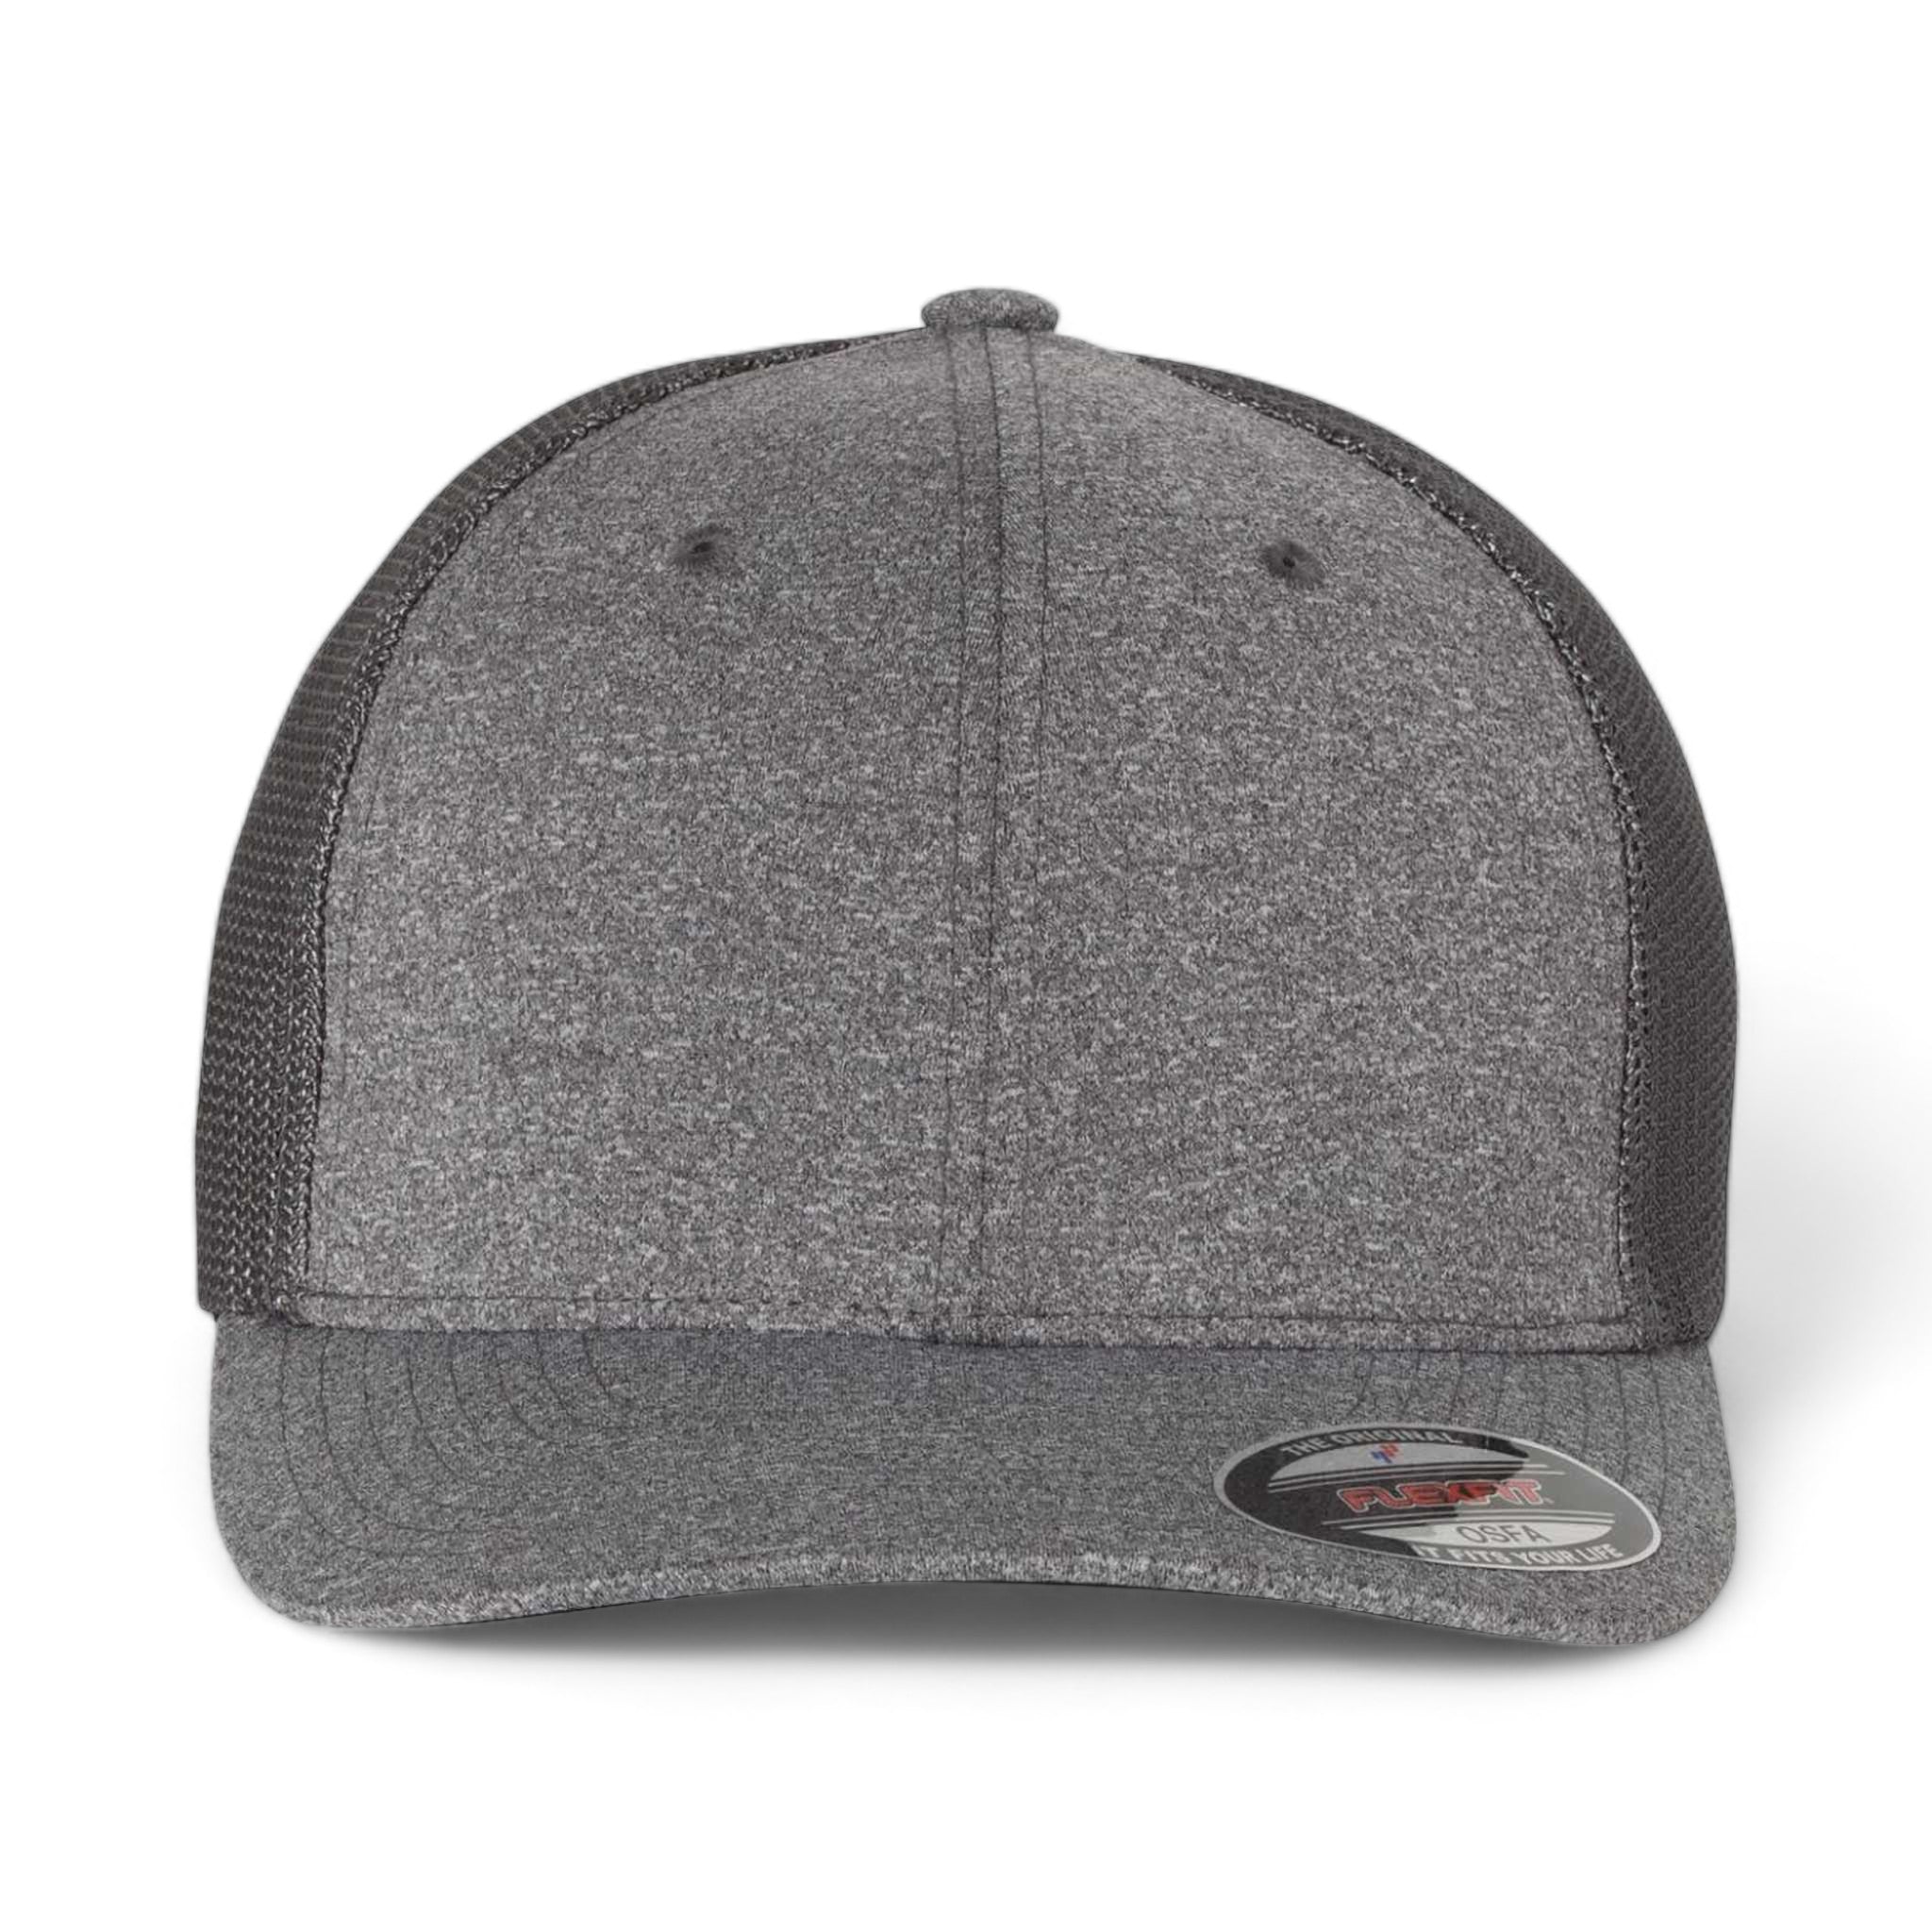 Front view of Flexfit 6311 custom hat in dark heather grey and charcoal